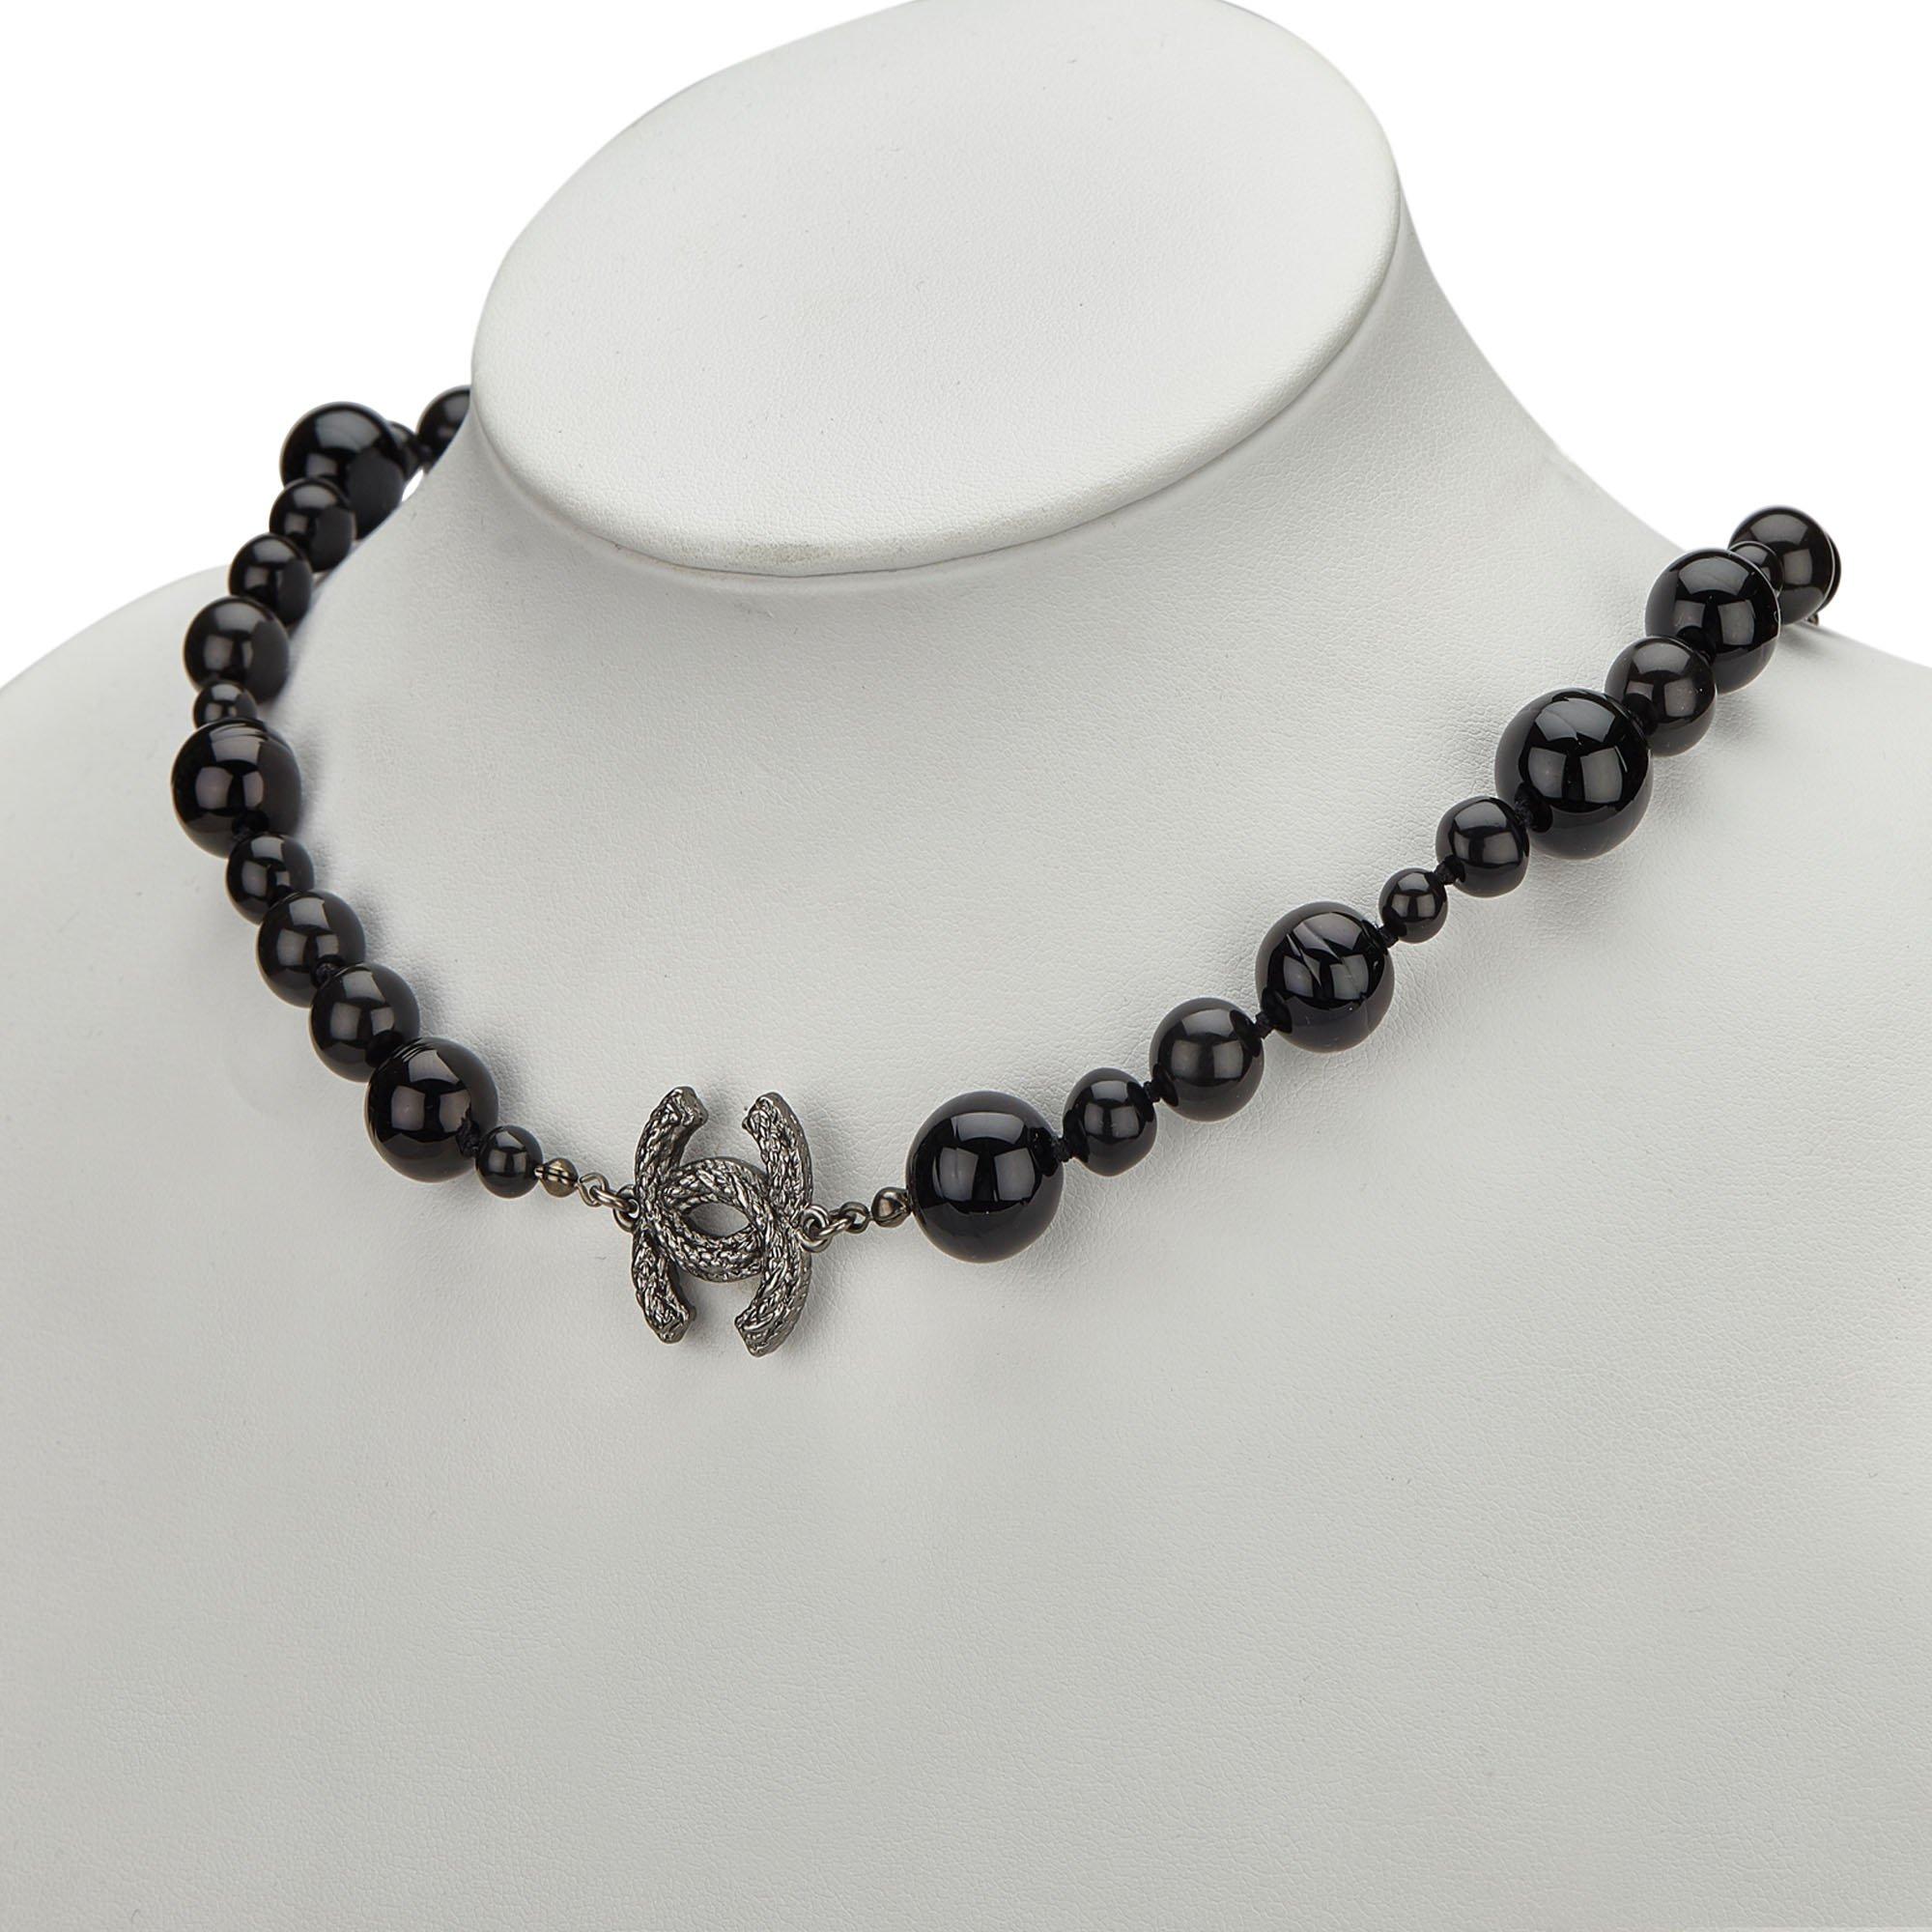 Chanel \n Black Pearl Necklace | Lyst